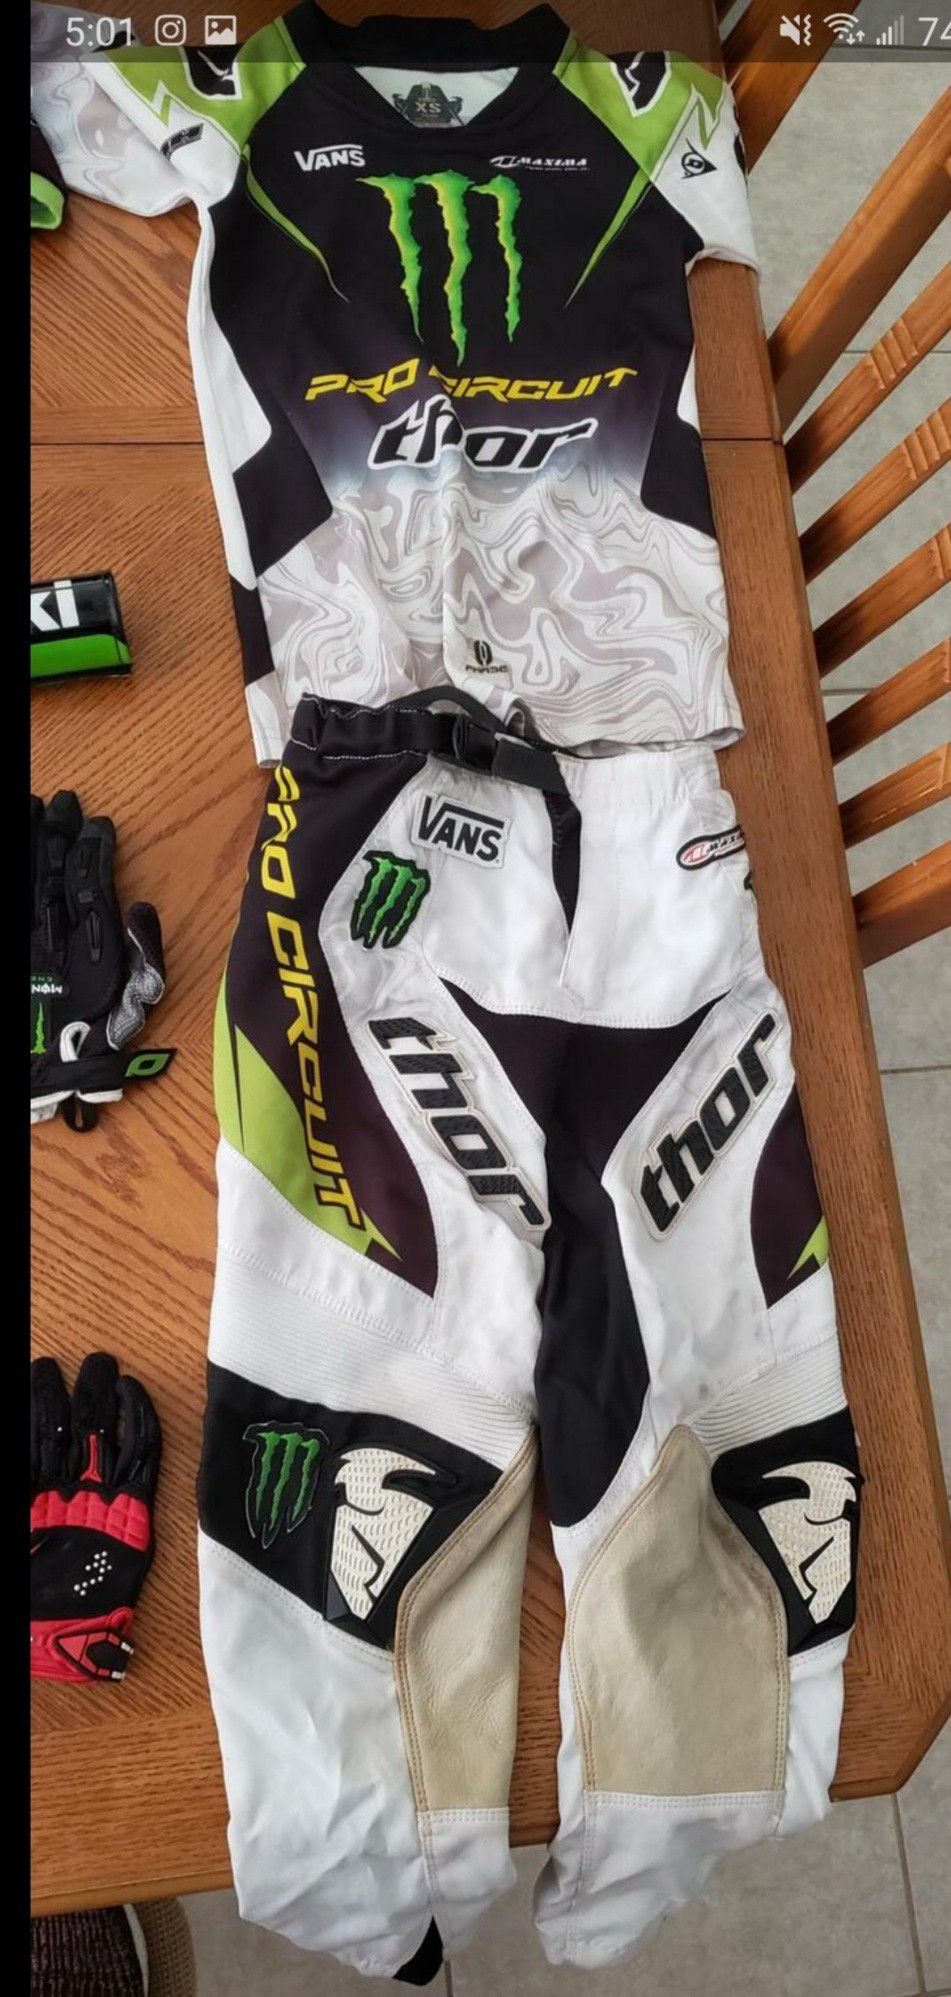 Fox ,Thor monster energy youth dirt bike riding gear (two sets) helmets, pants, shirts, gloves etc